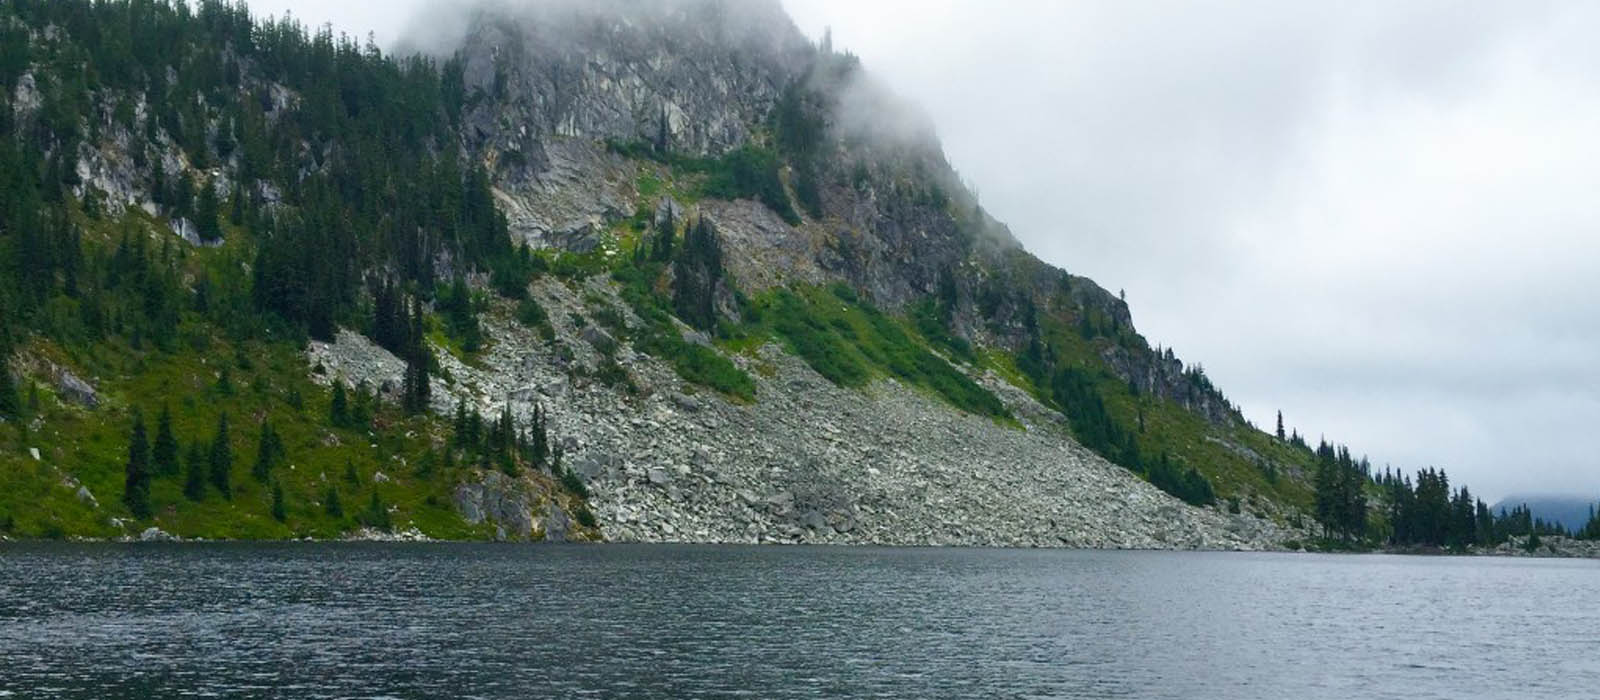 Hikes in Washington with Stunning Views